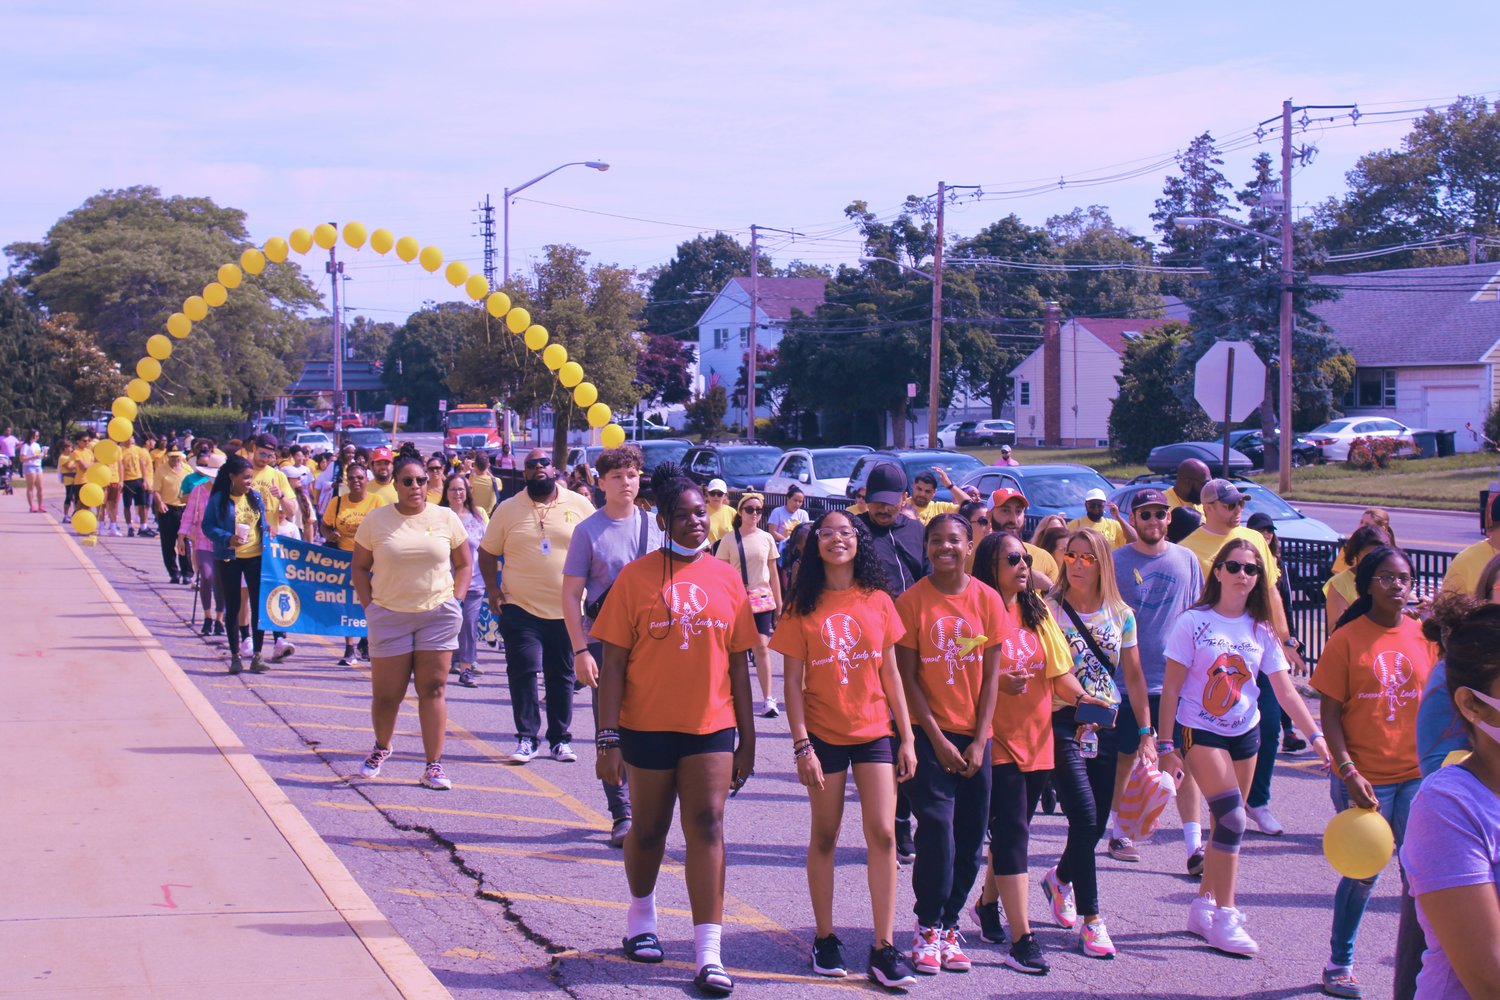 Participants in the 13th Annual Freedom Cares Peace March streamed through an arc of yellow balloons as they started their route on Saturday morning.